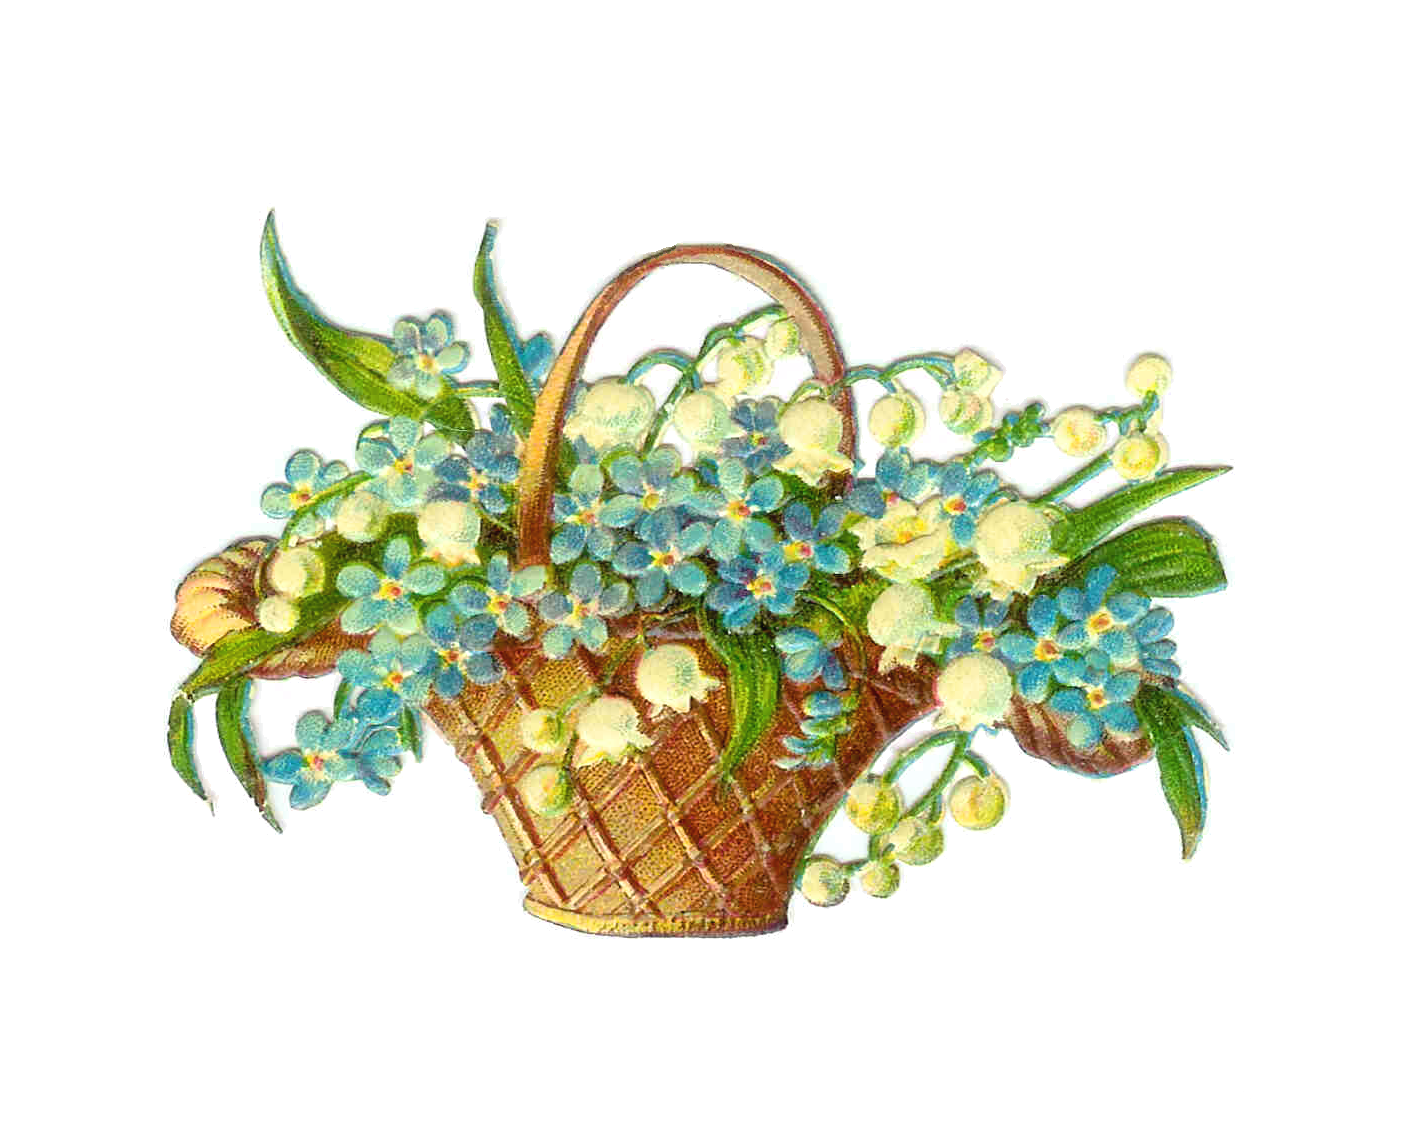 Clip Arts Related To : basket of flowers happy birthday. view all Easter Fl...